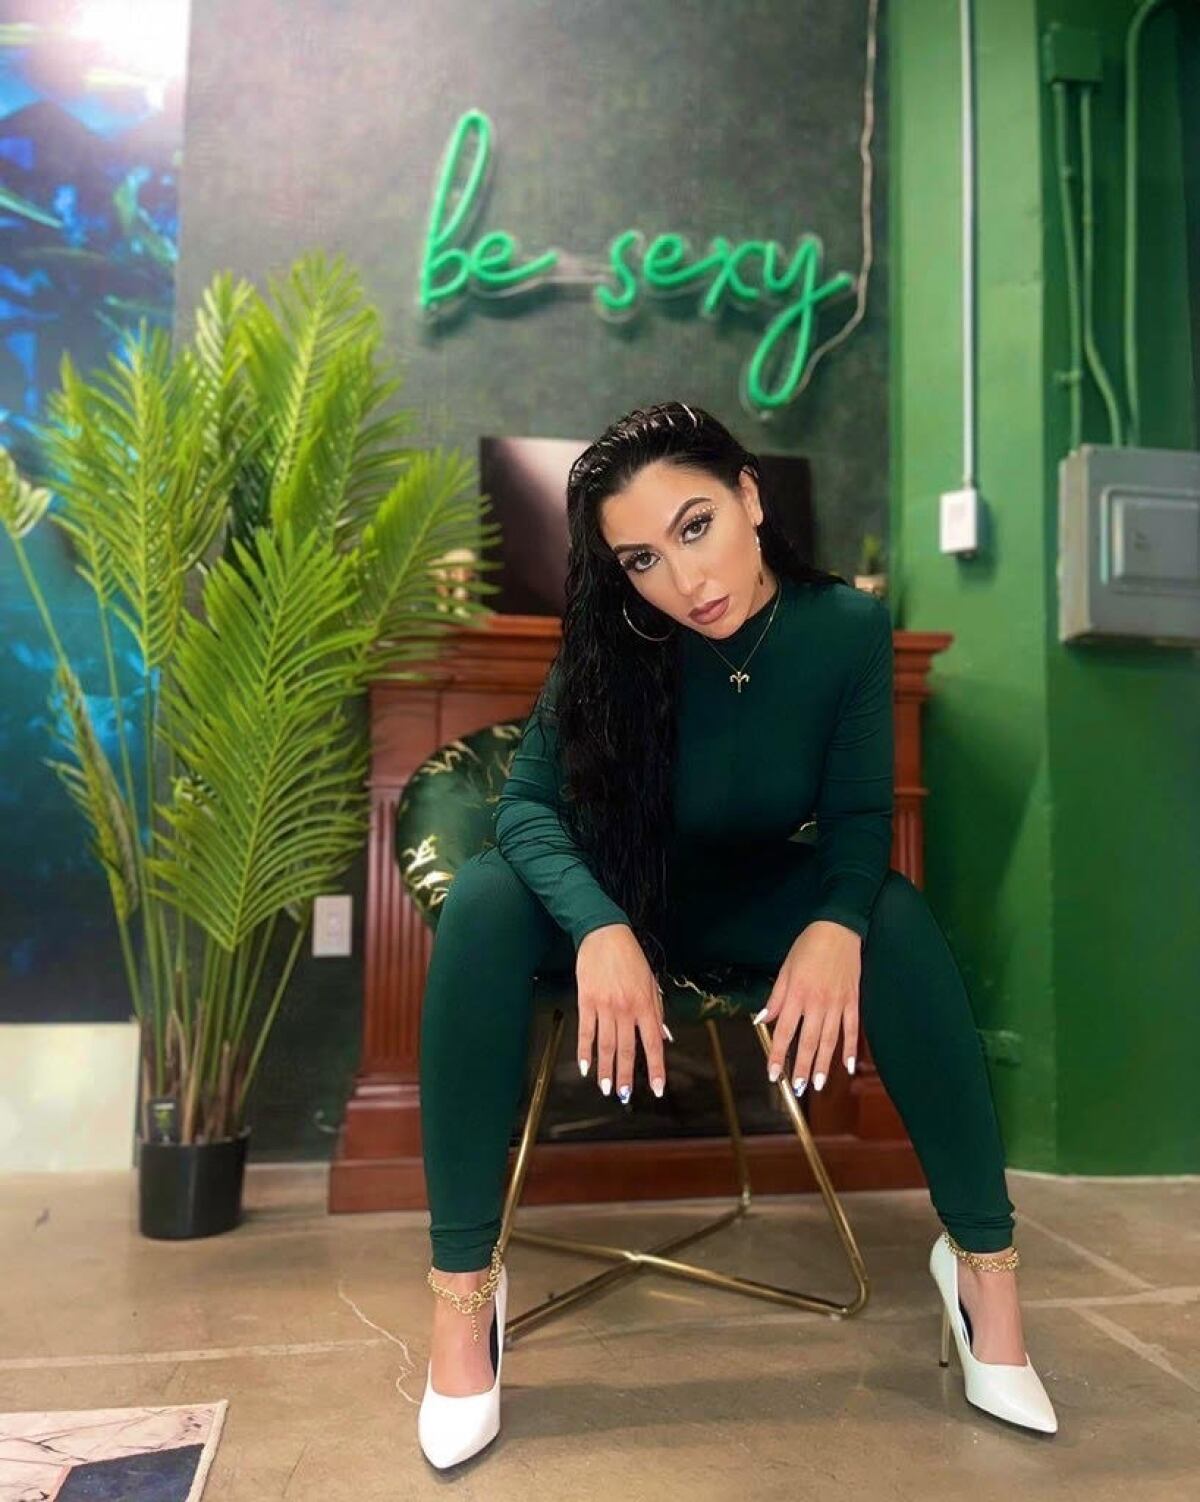 Jessica Vanessa, a social media influencer, sitting in a chair under a neon sign reading 